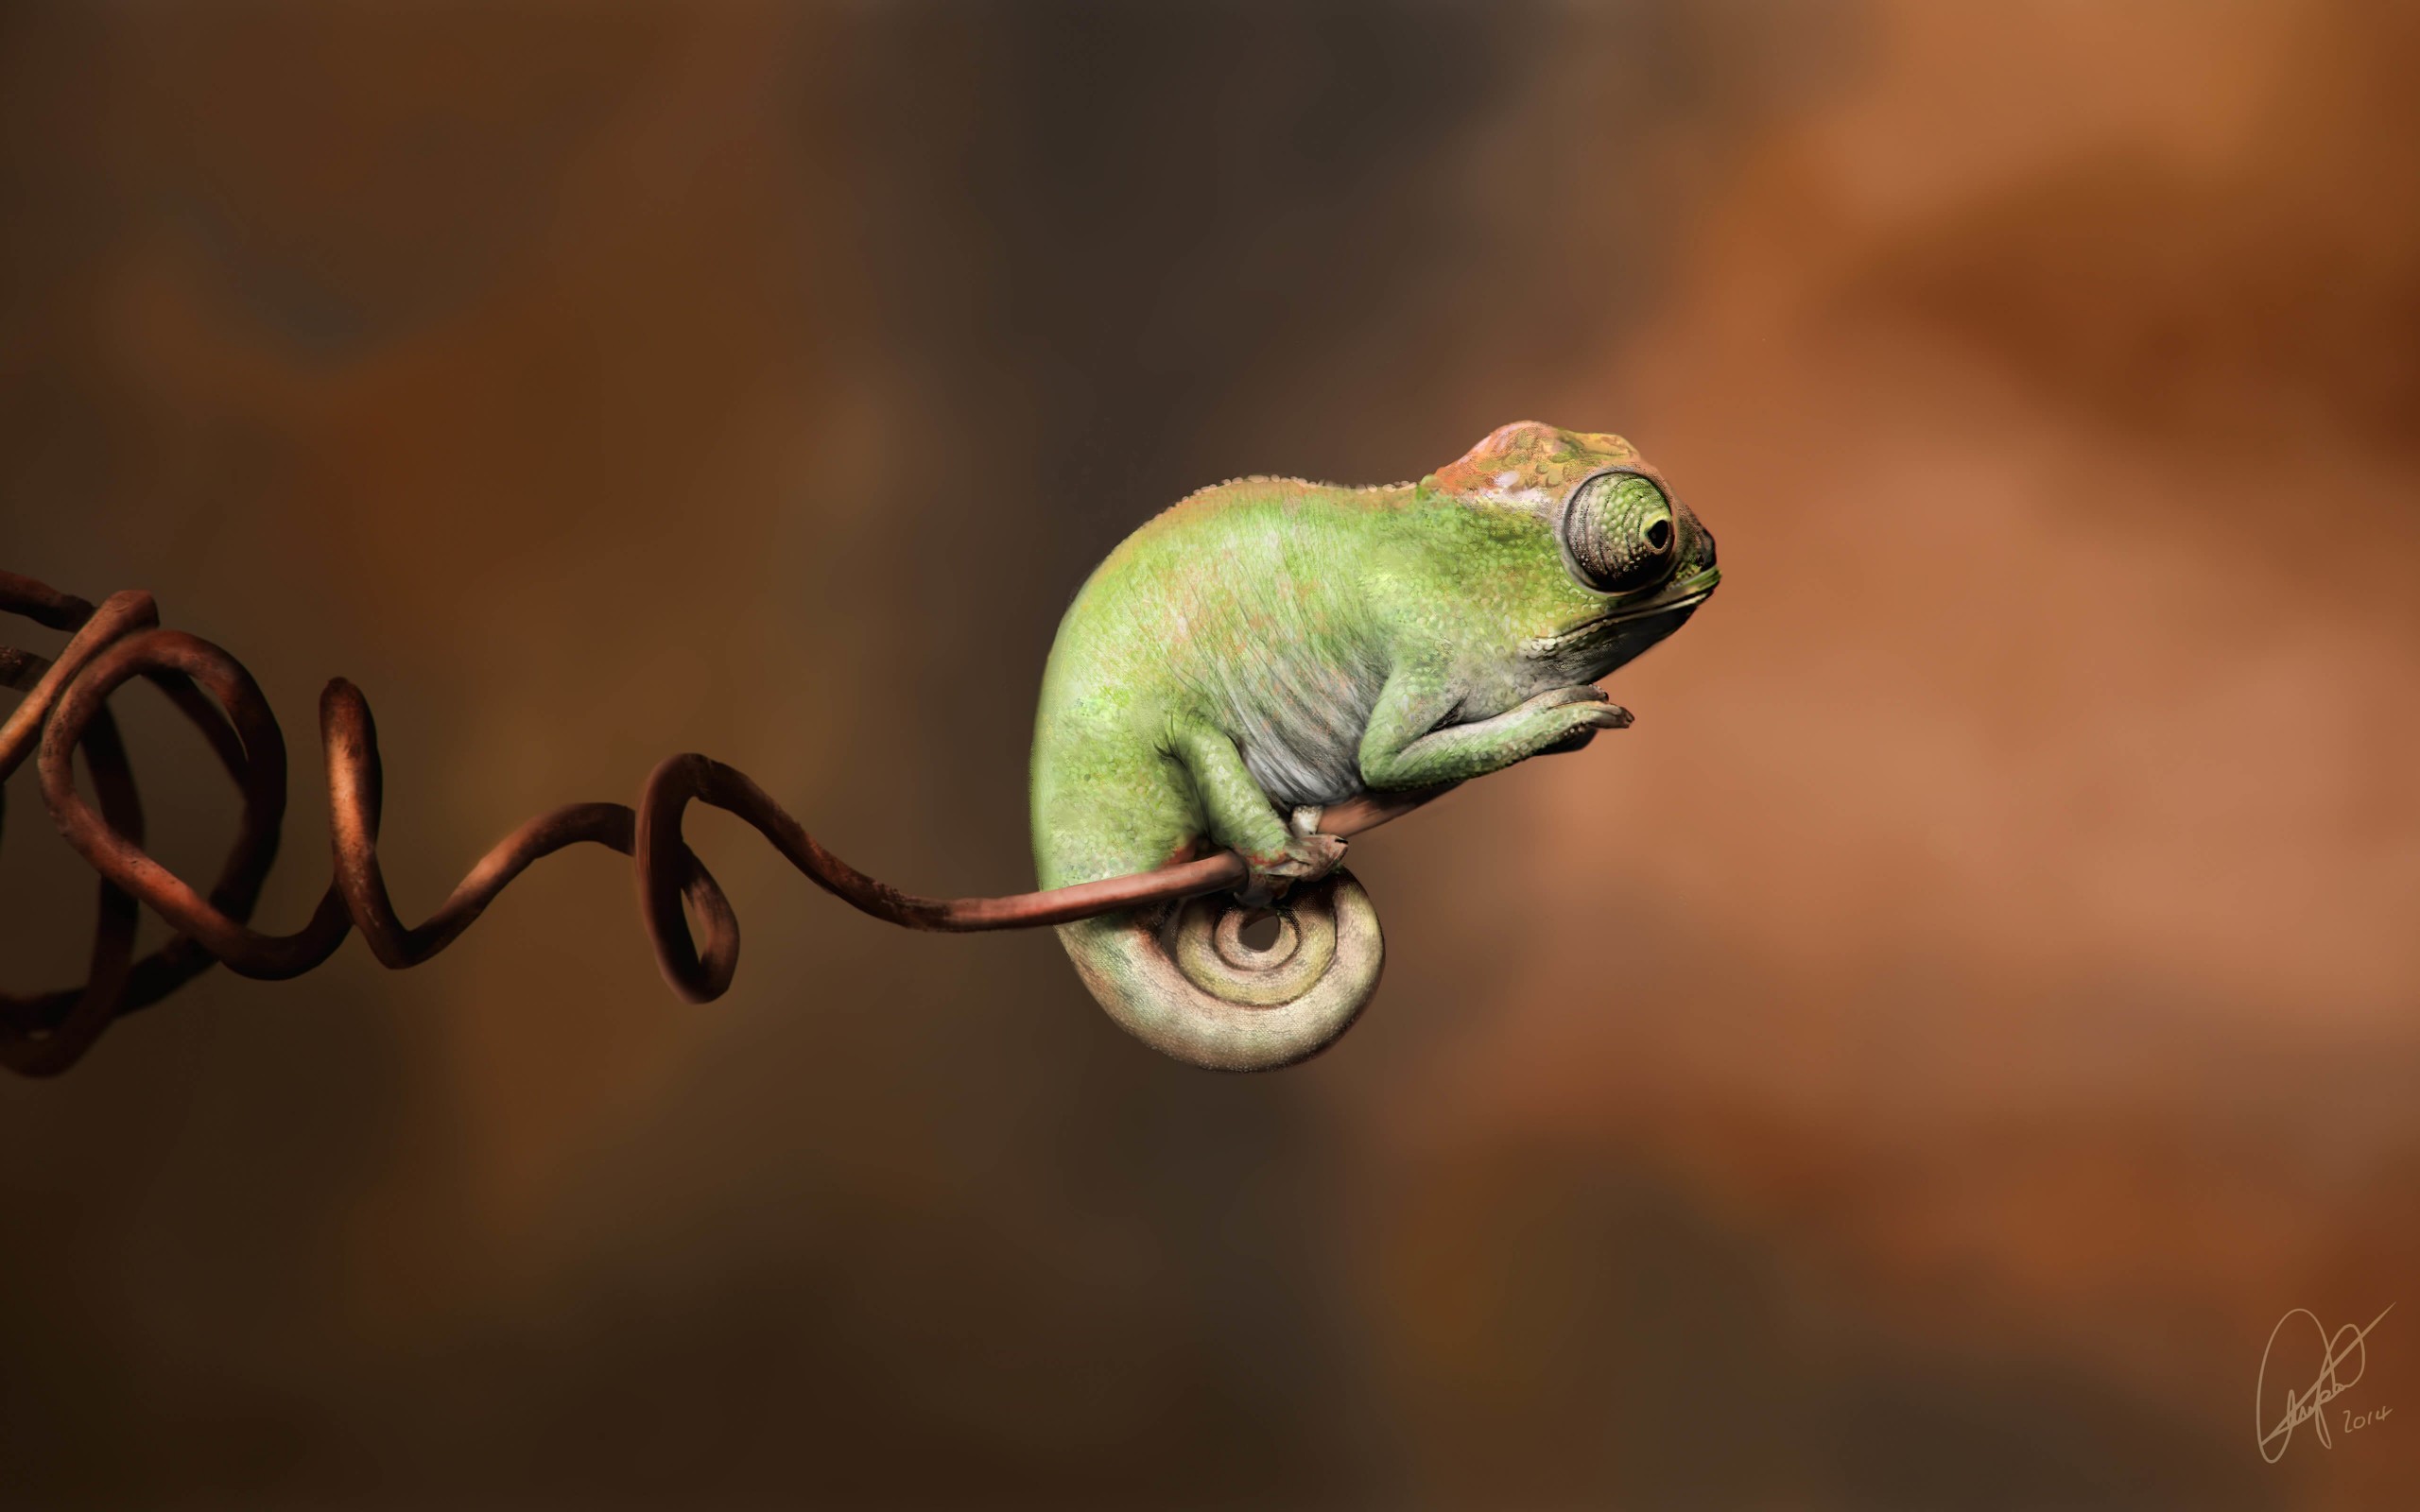 Baby Chameleon Perching On a Twisted Branch Wallpaper for Desktop 2560x1600